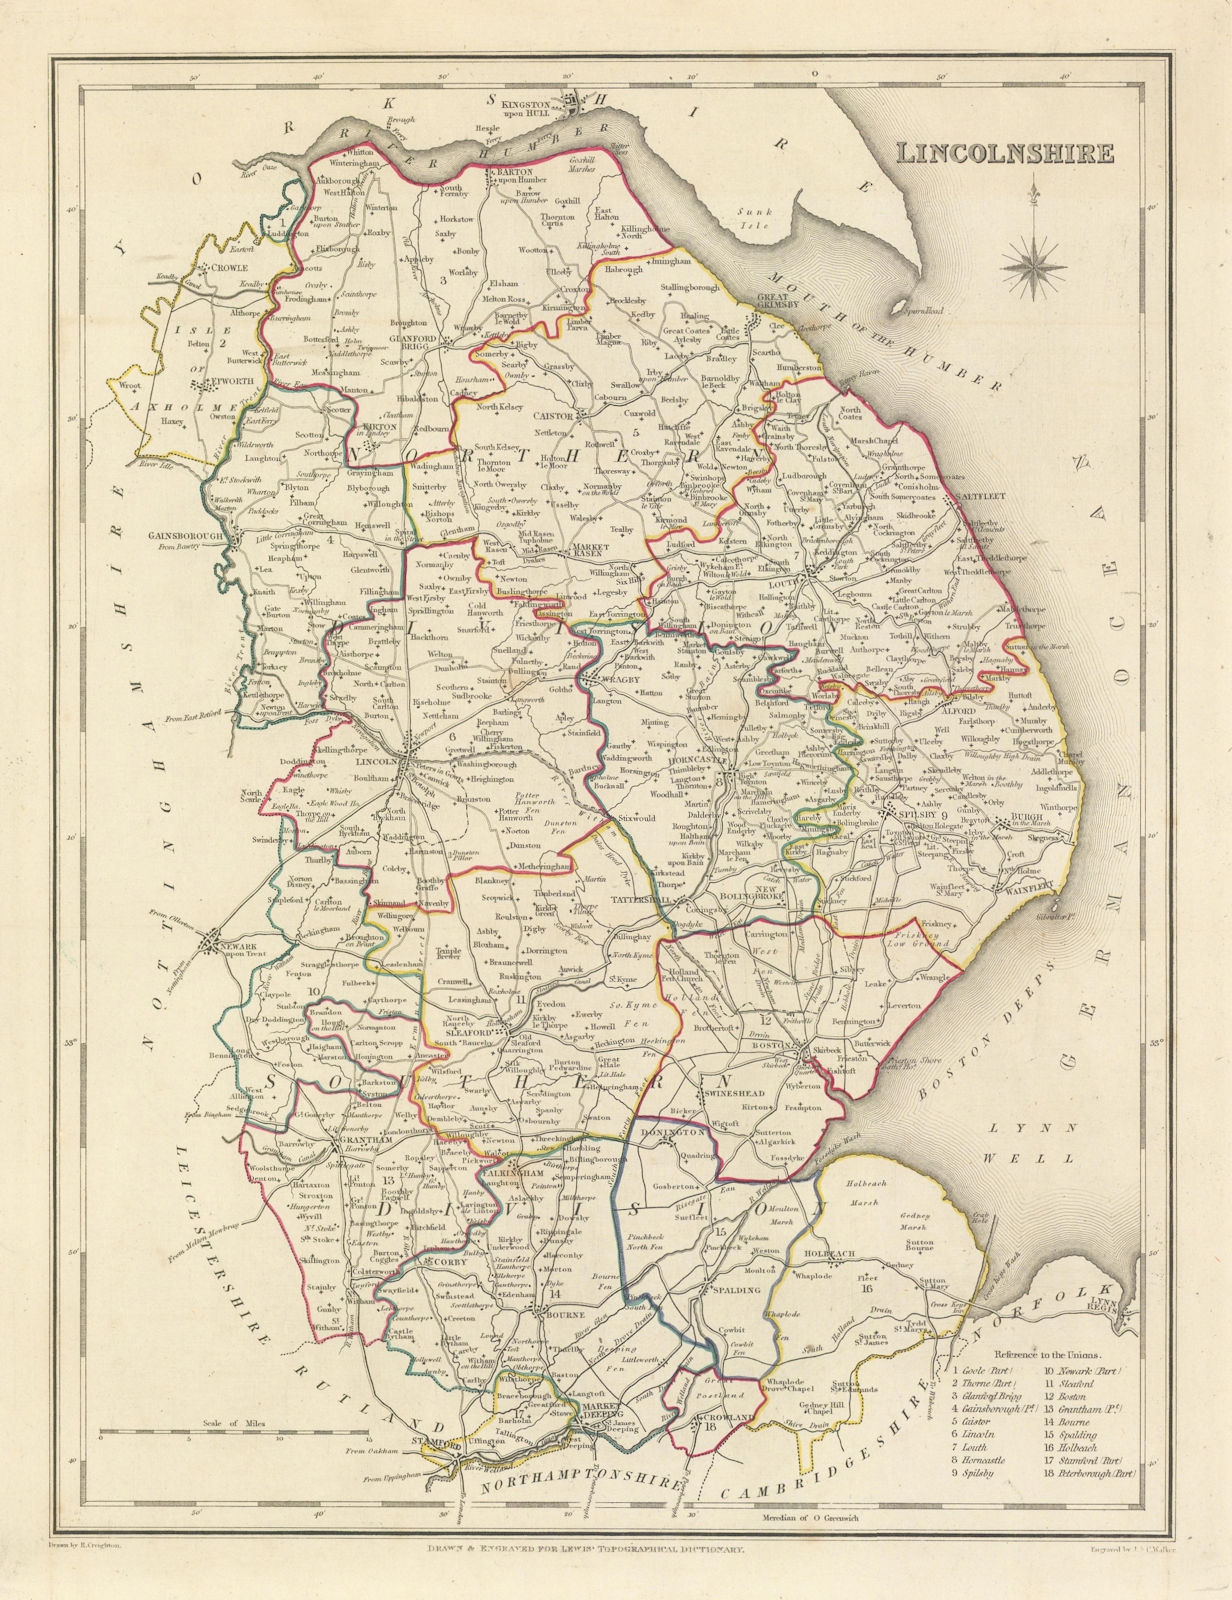 Associate Product Antique county map of LINCOLNSHIRE by Creighton & Walker for Lewis c1840